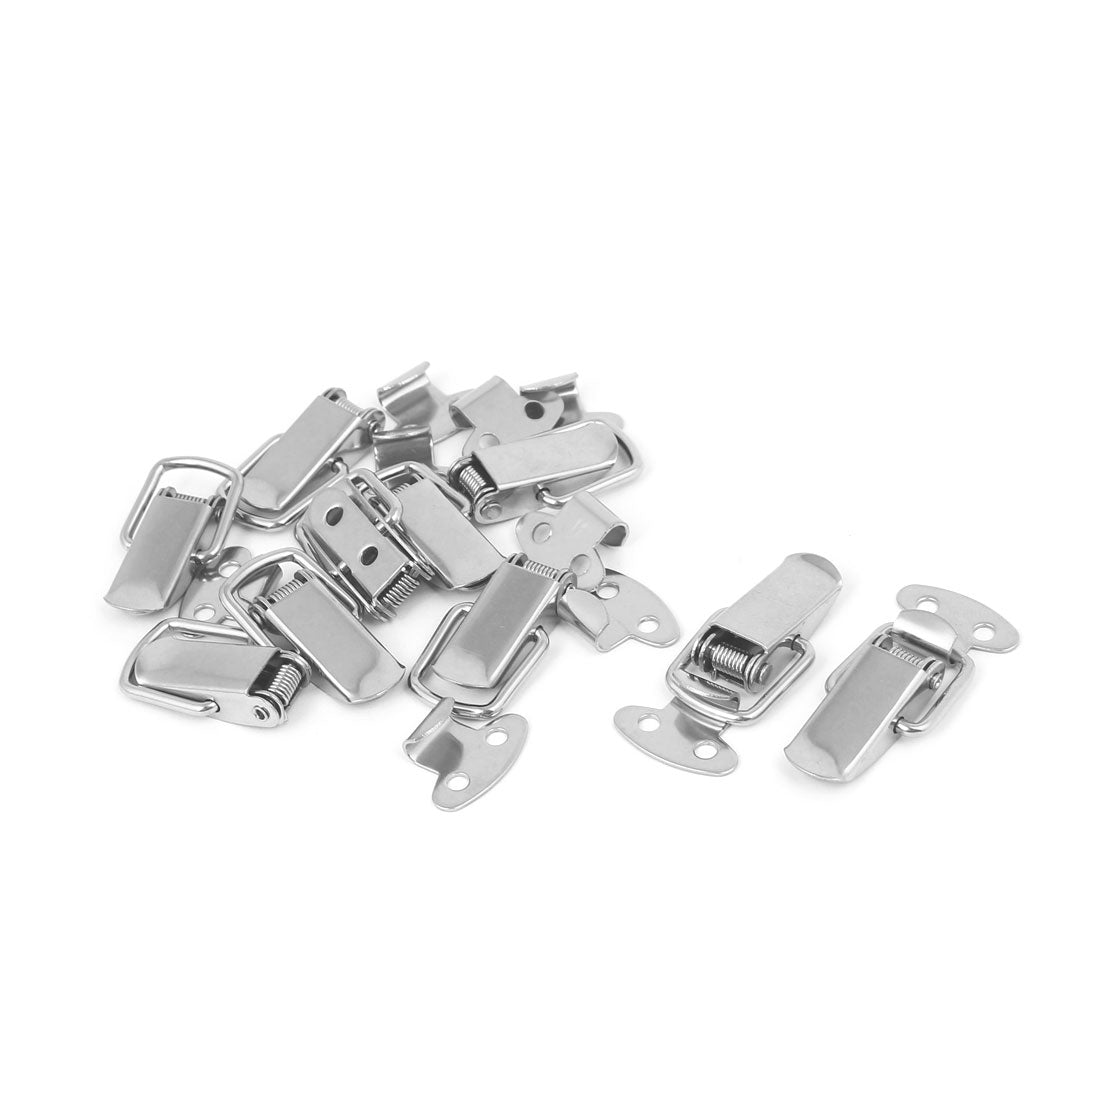 uxcell Uxcell Toolbox Drawer Stainless Steel Spring Toggle Latch Box Hasp 35mmx20mmx13mm 10pcs